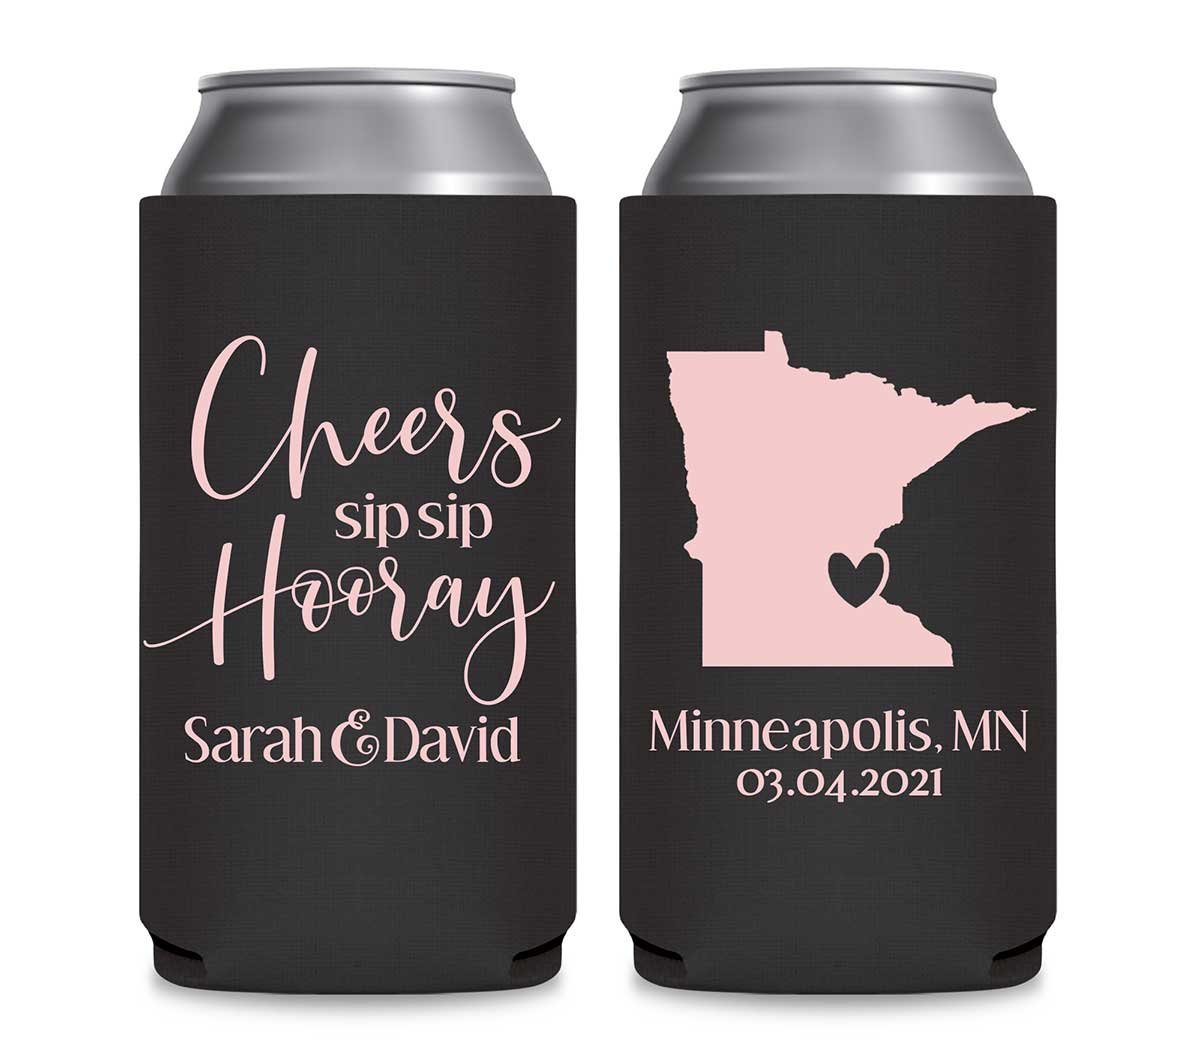 Sip Sip Hooray 2B Any Map Foldable 12 oz Slim Can Koozies Wedding Gifts for Guests